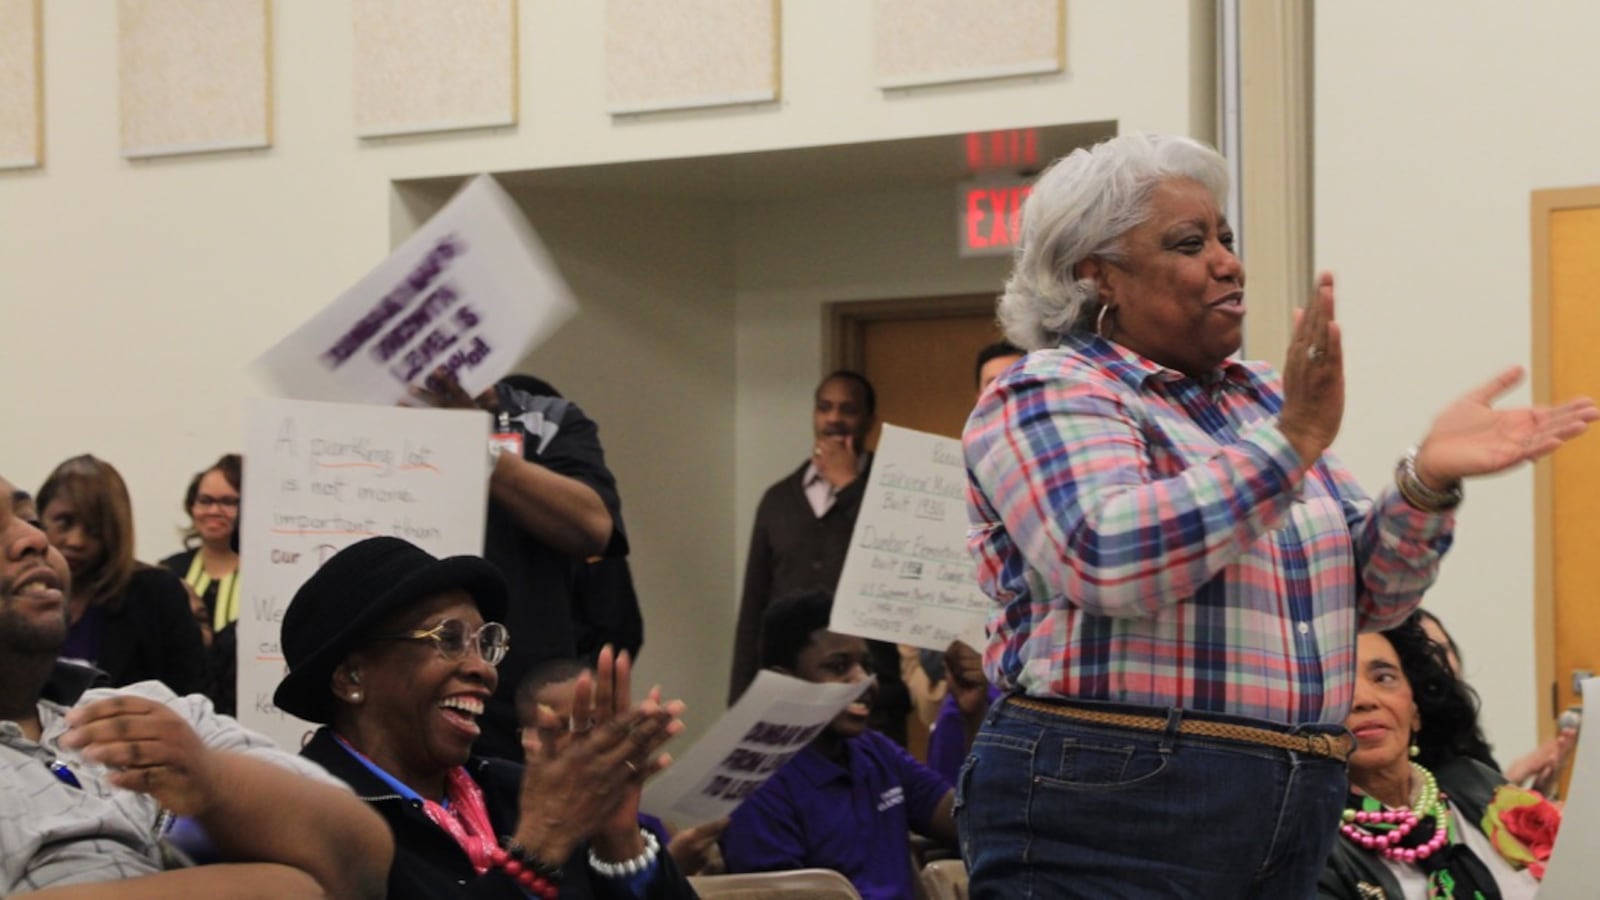 Claudette Boyd applauds during public comment at a Shelby County Schools board meeting regarding a vote to close Dunbar Elementary School.